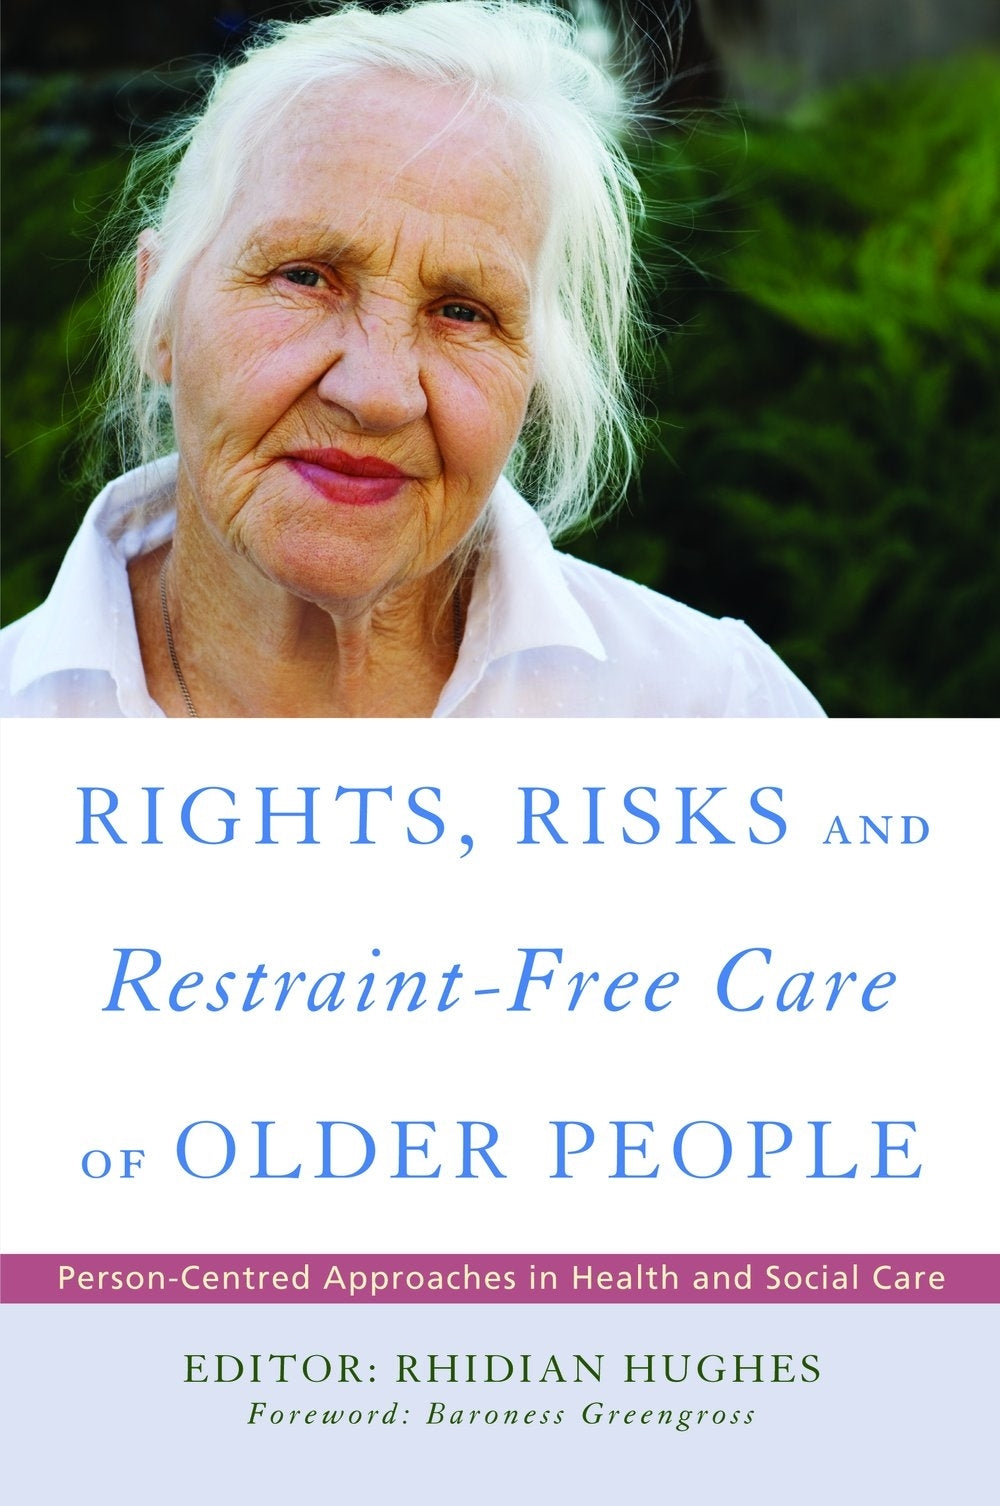 Rights, Risk and Restraint-Free Care of Older People by Rhidian Hughes